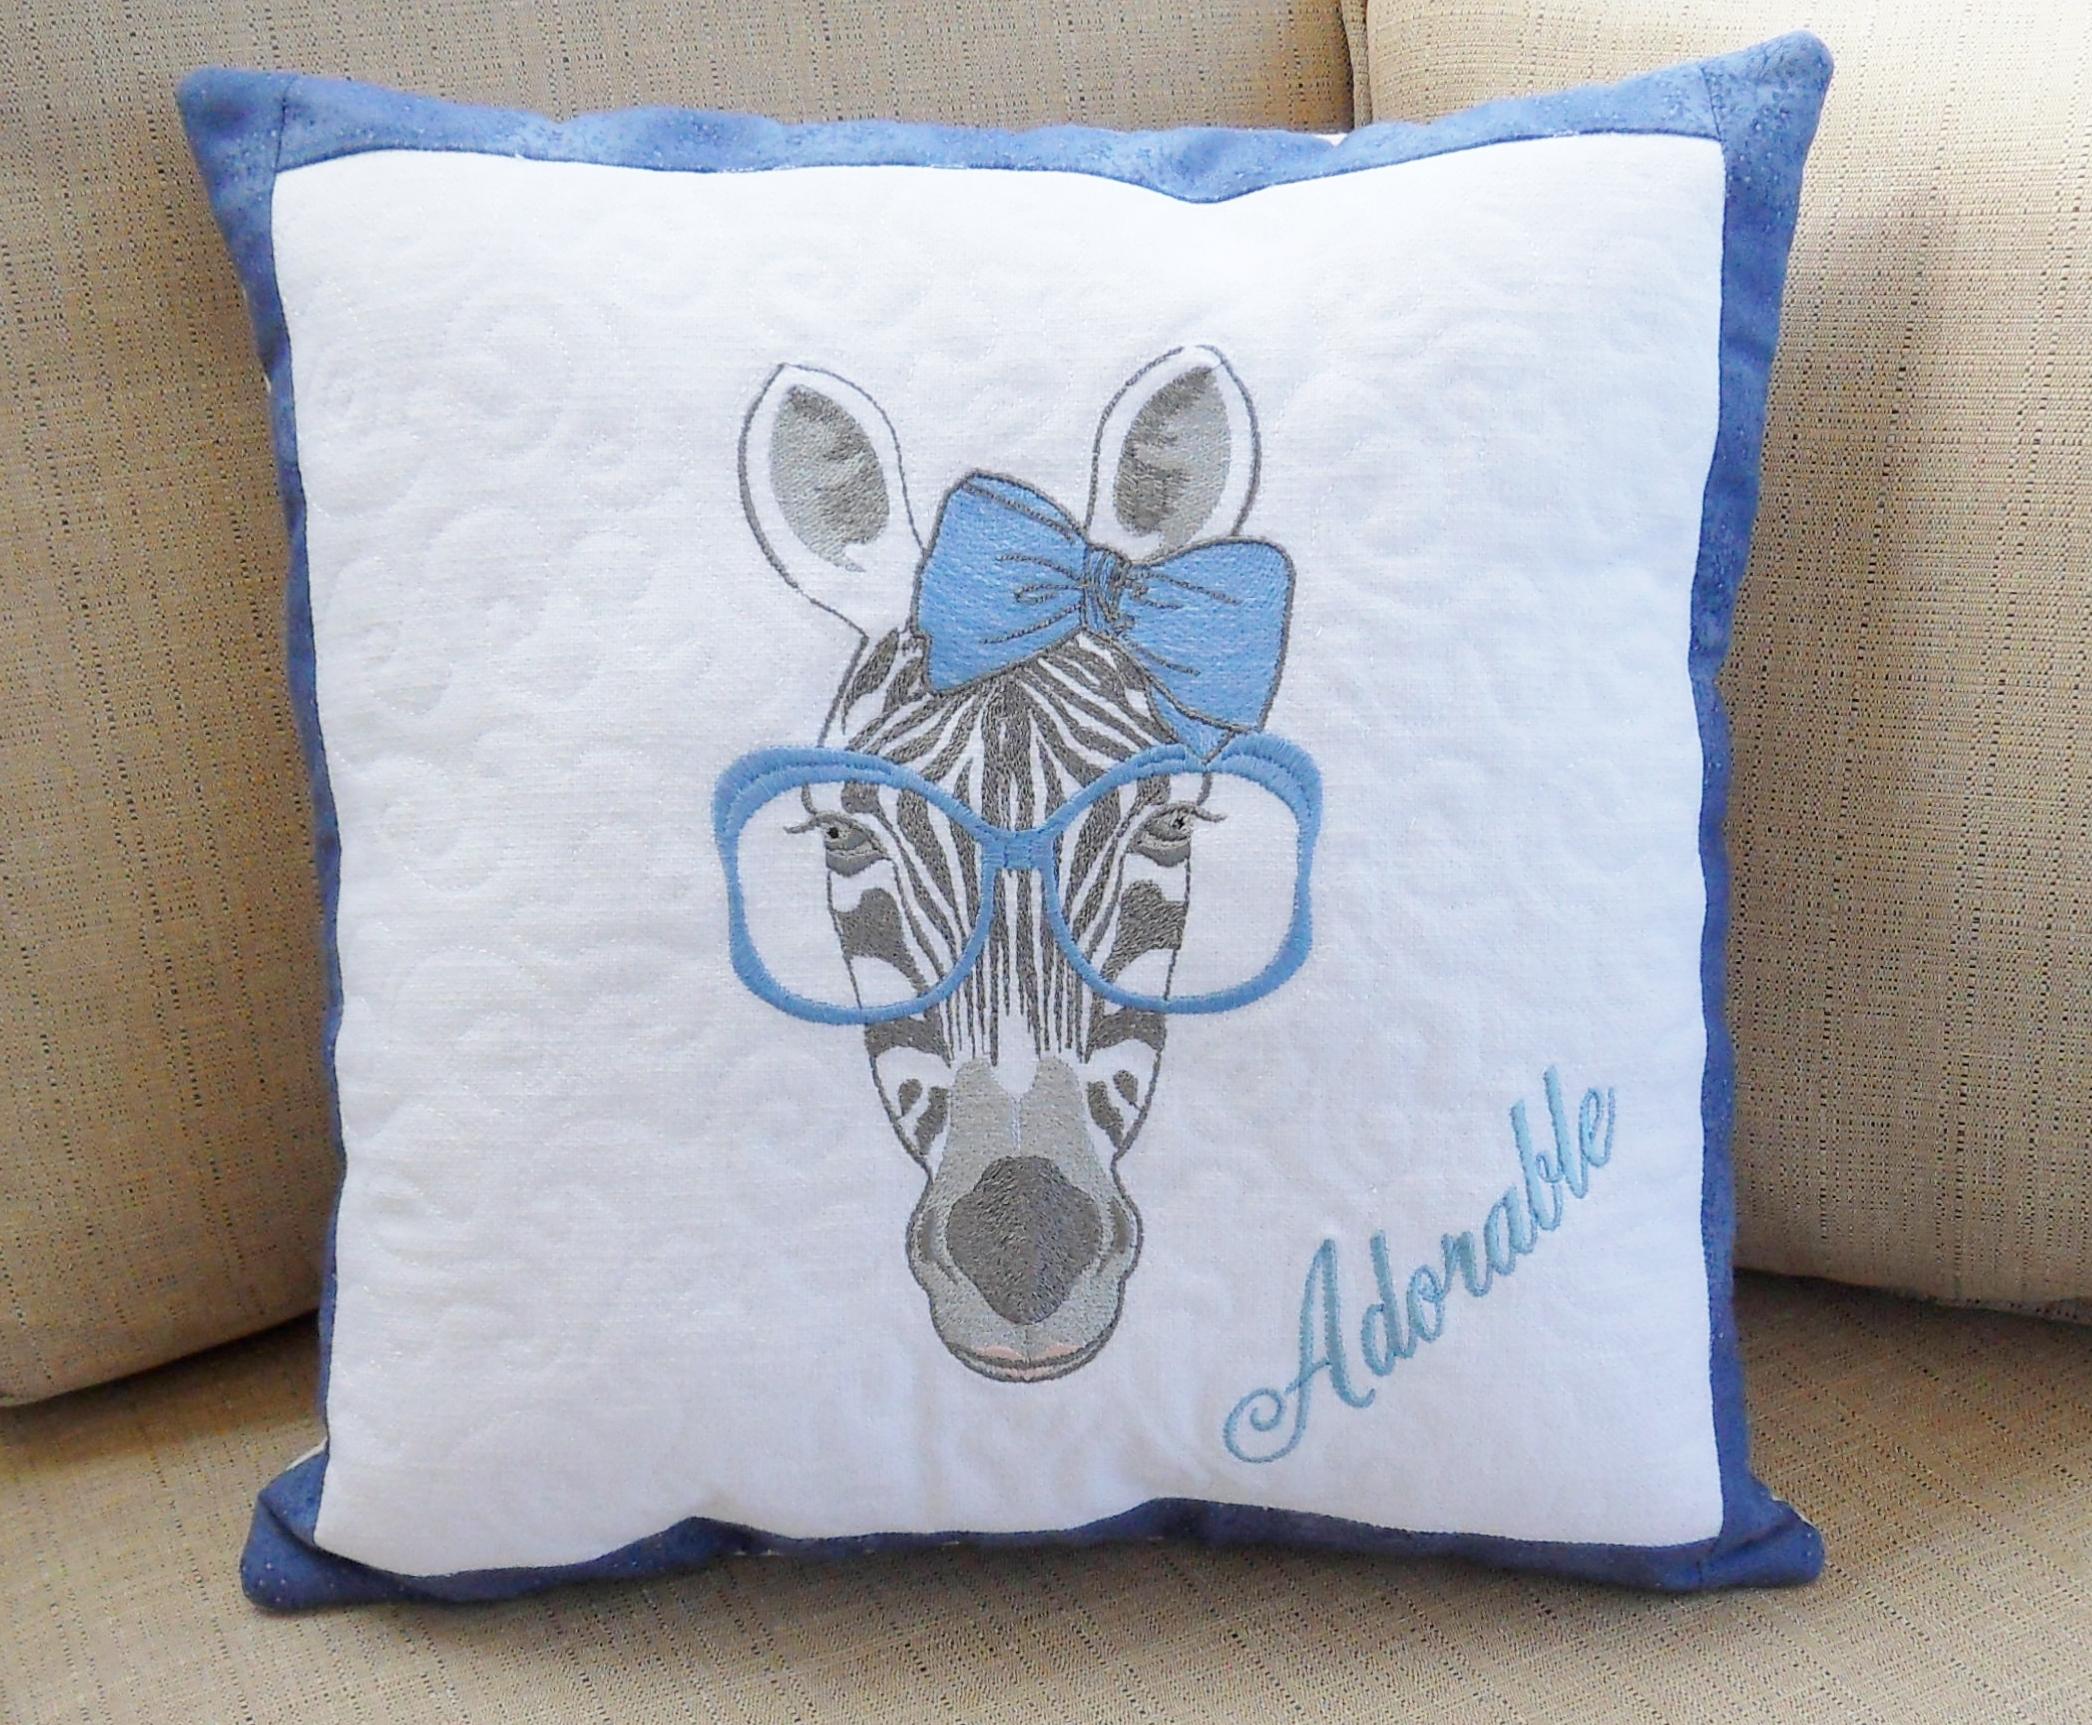 Zebra embroidered pillow